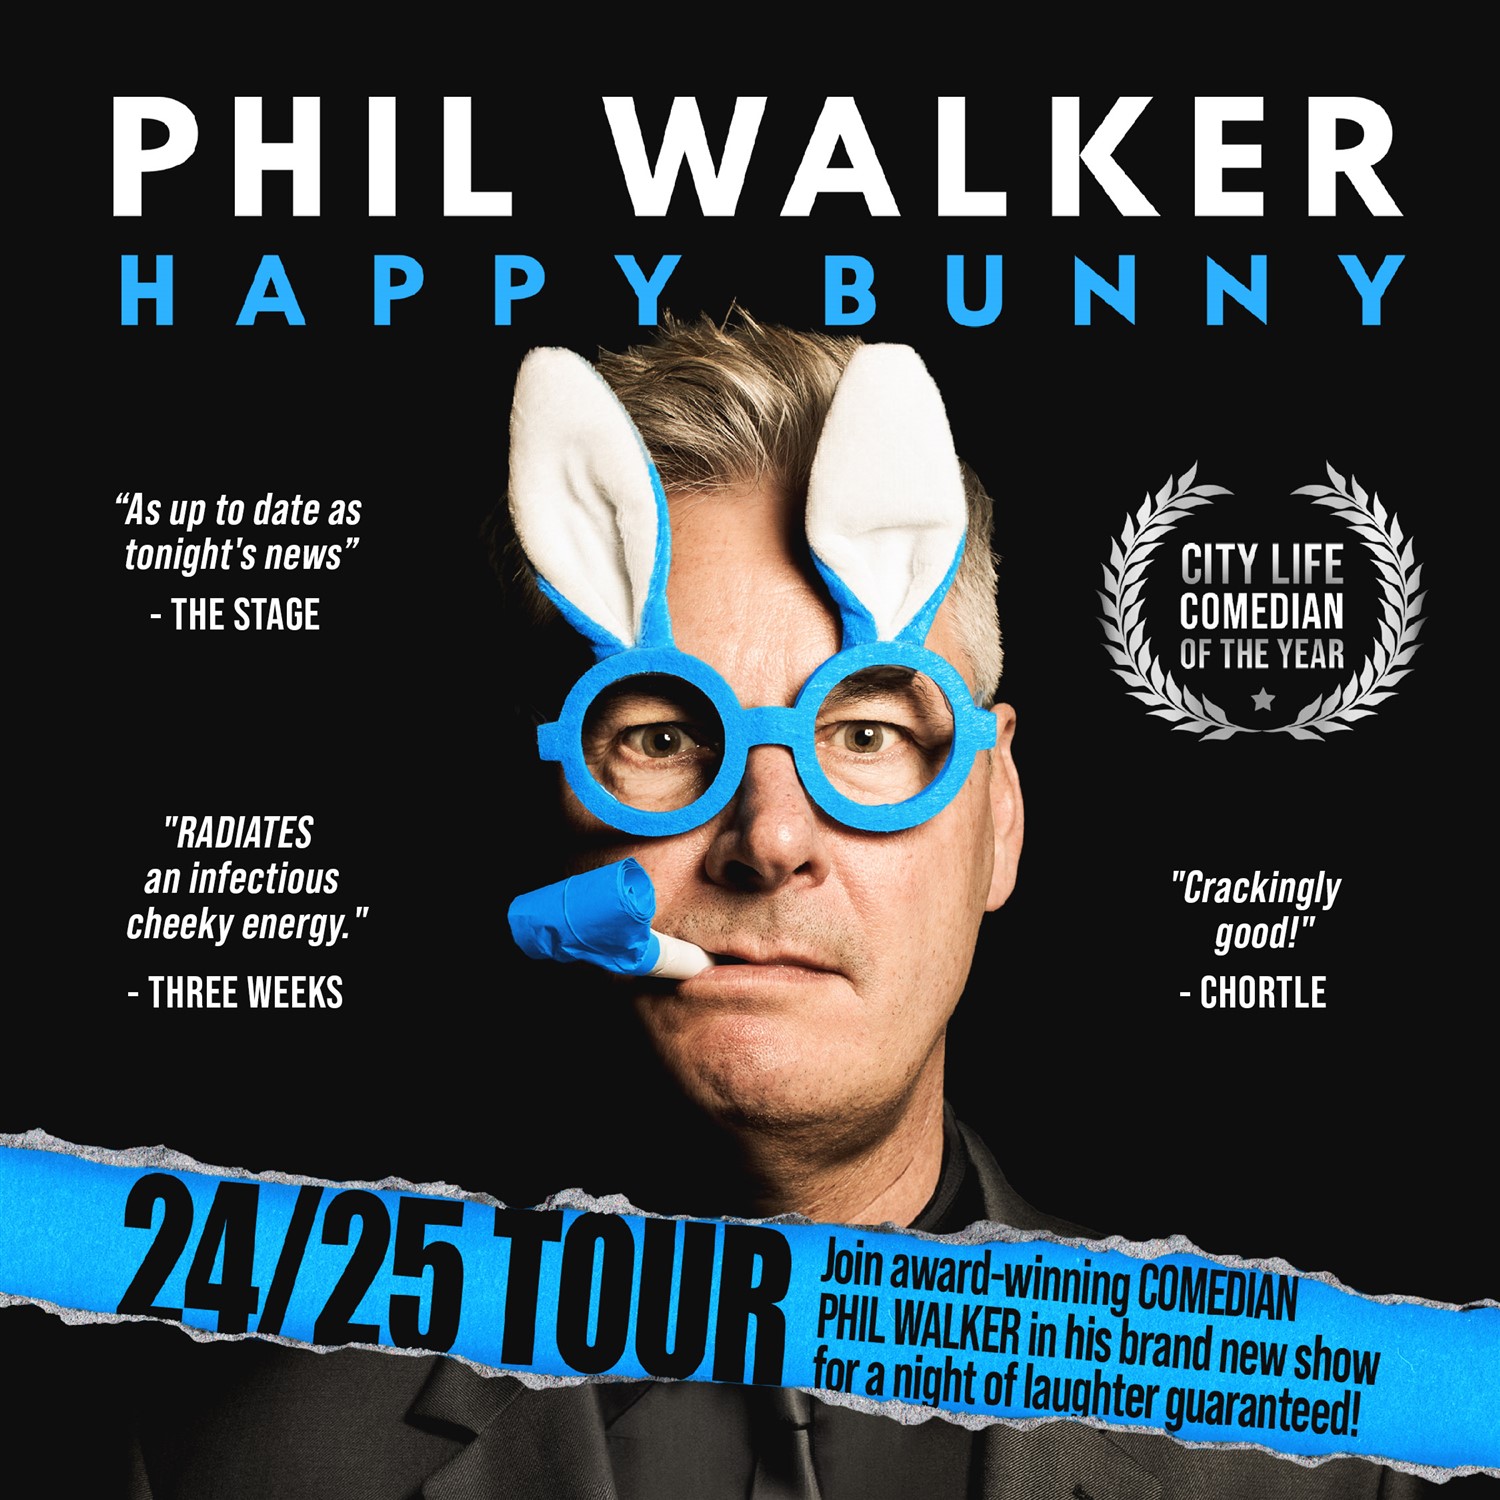 PHIL WALKER - HAPPY BUNNY  on Feb 27, 19:30@Standard capacity - Pick a seat, Buy tickets and Get information on Sutton Coldfield Town Hall 